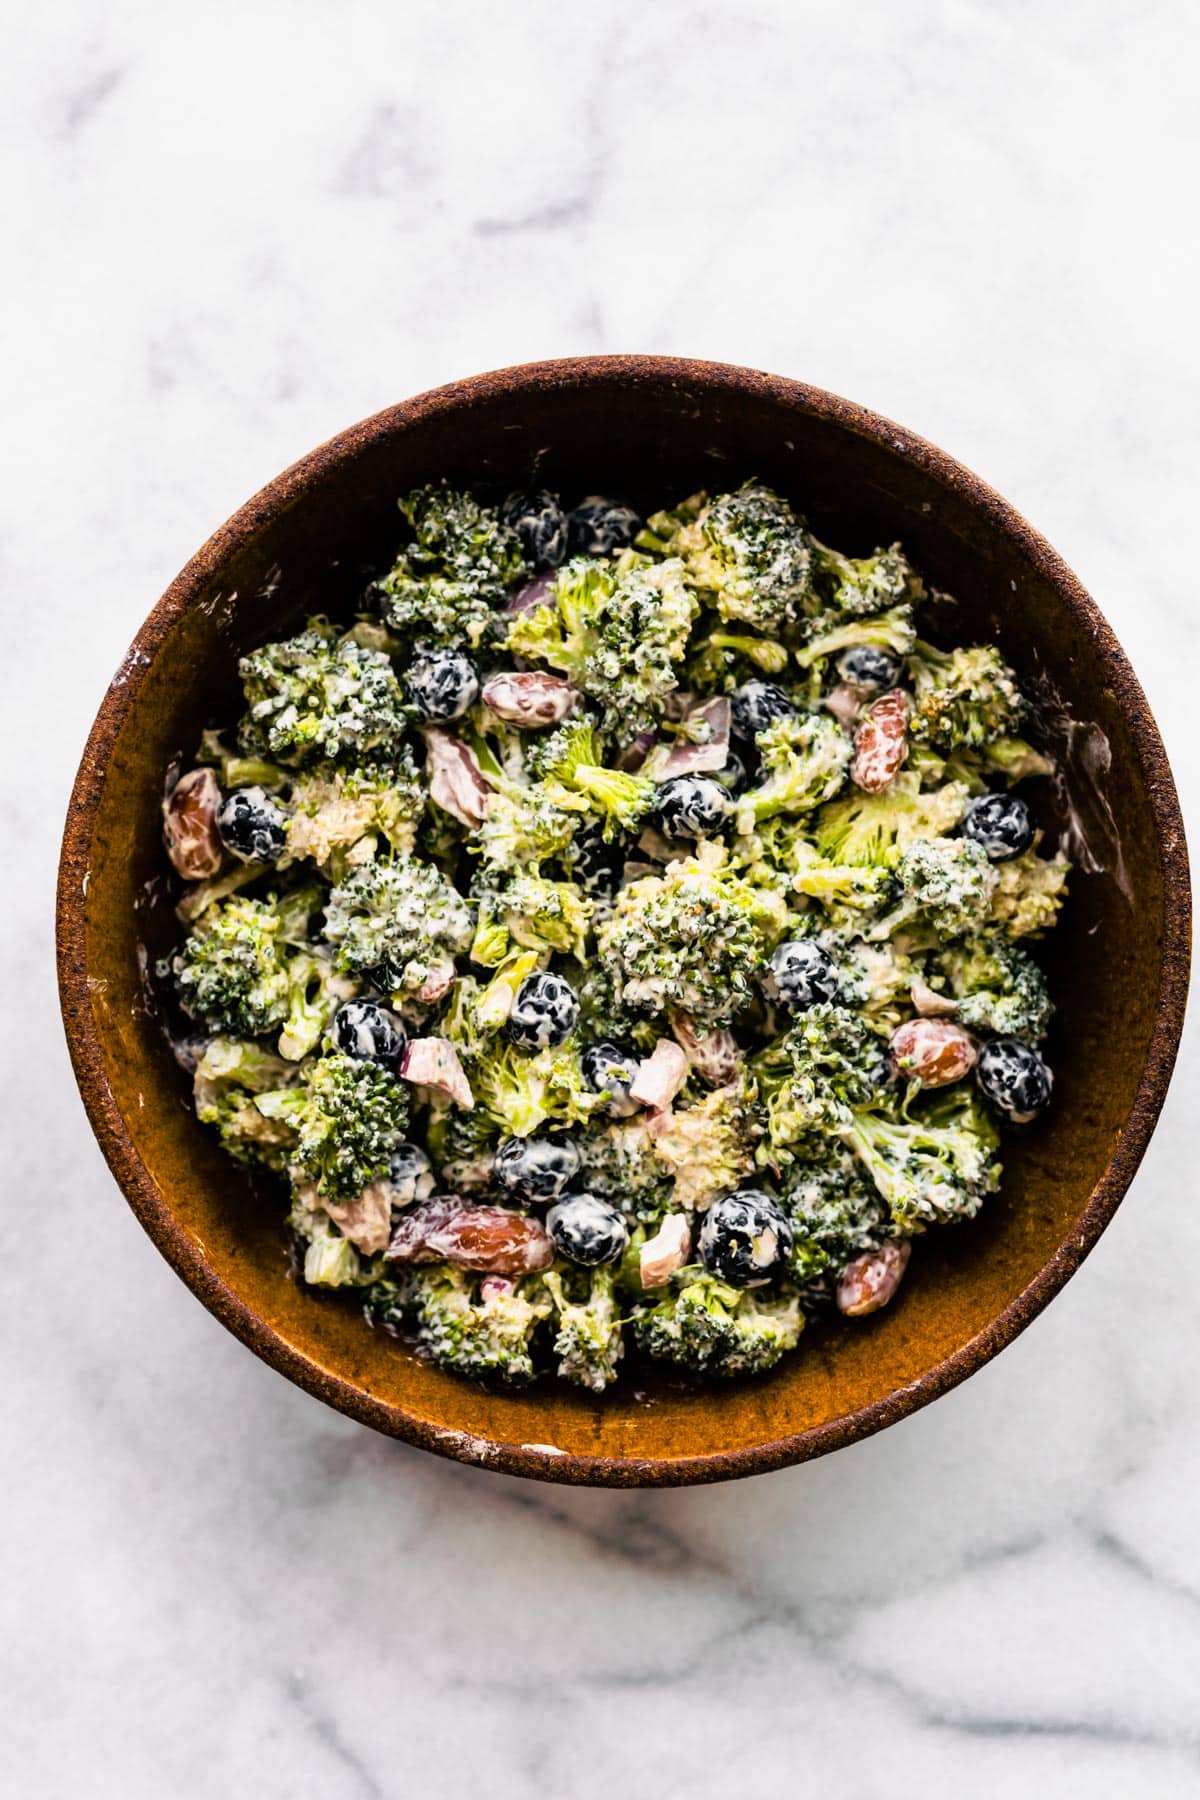 A large wooden bowl with a healthy broccoli salad.